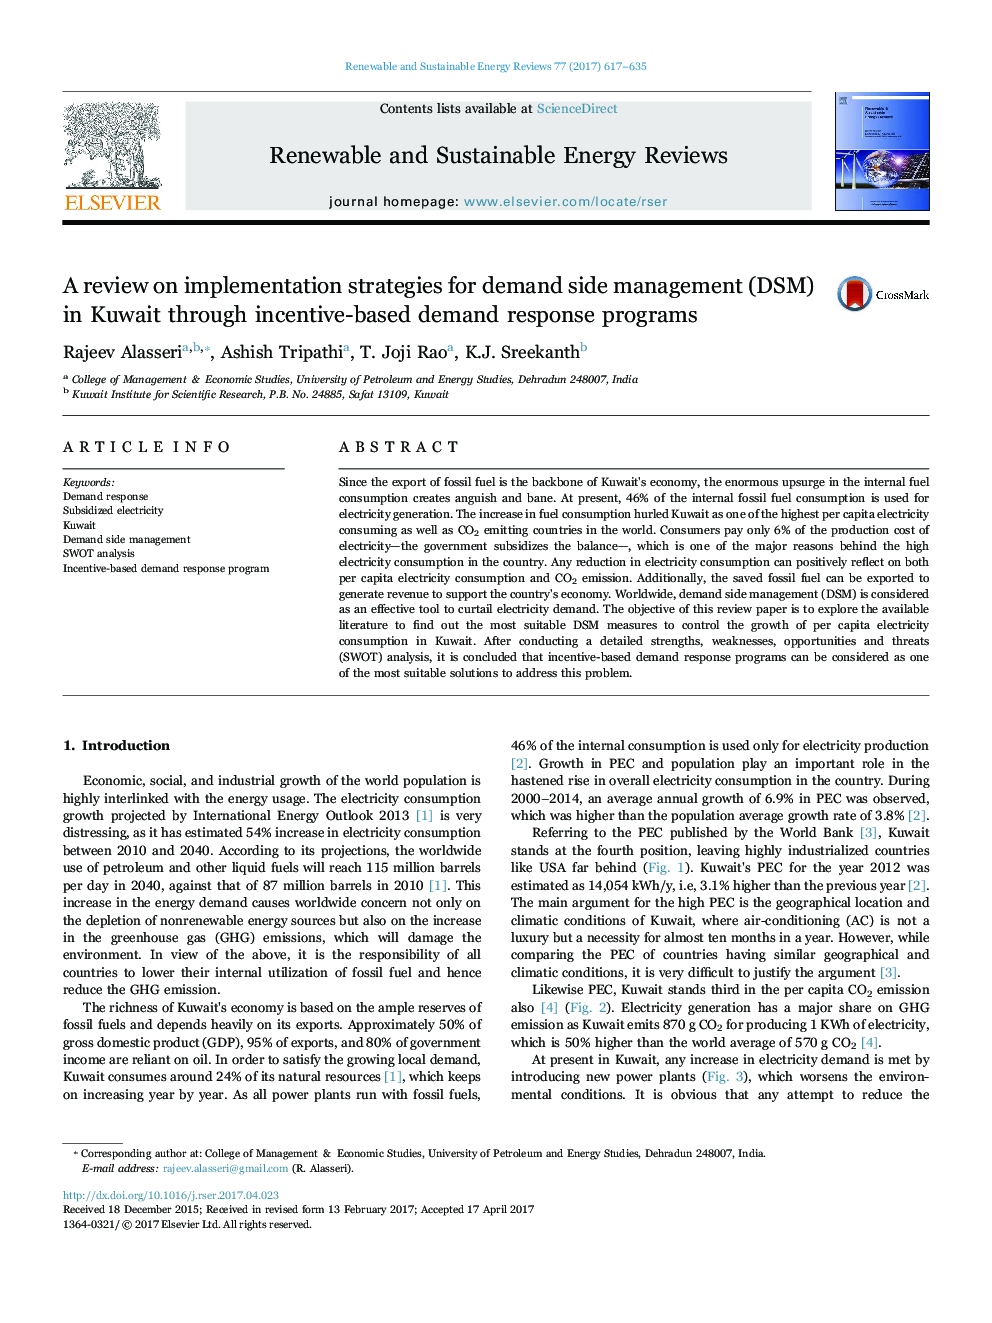 A review on implementation strategies for demand side management (DSM) in Kuwait through incentive-based demand response programs